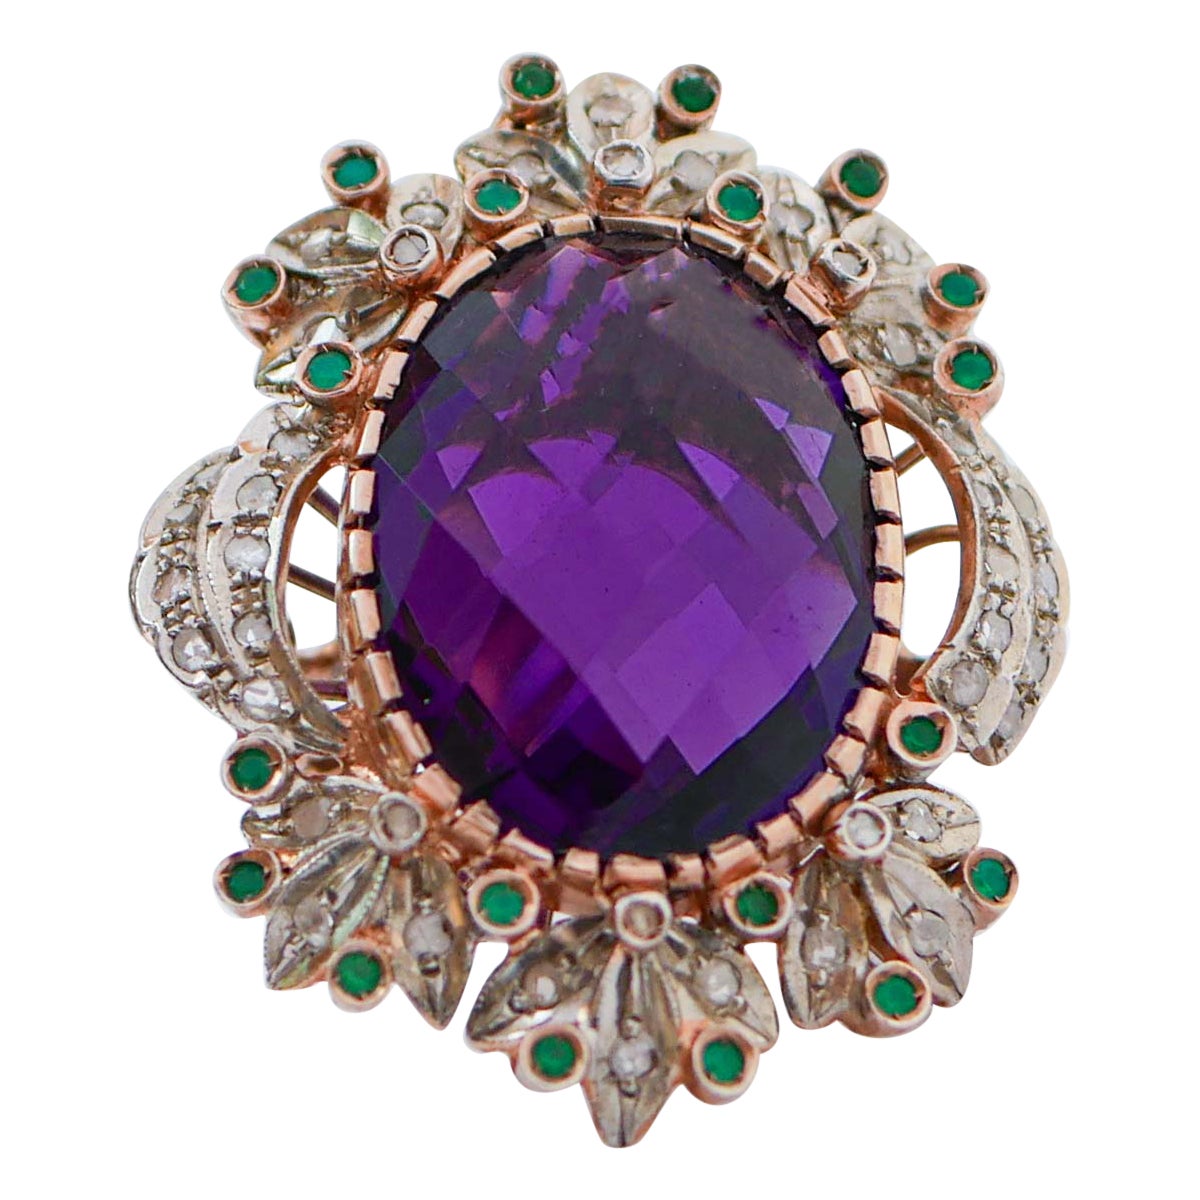 Hydrothermal Amethyst, Green Agate, Diamonds, 14 Kt Rose Gold and Silver Ring. For Sale